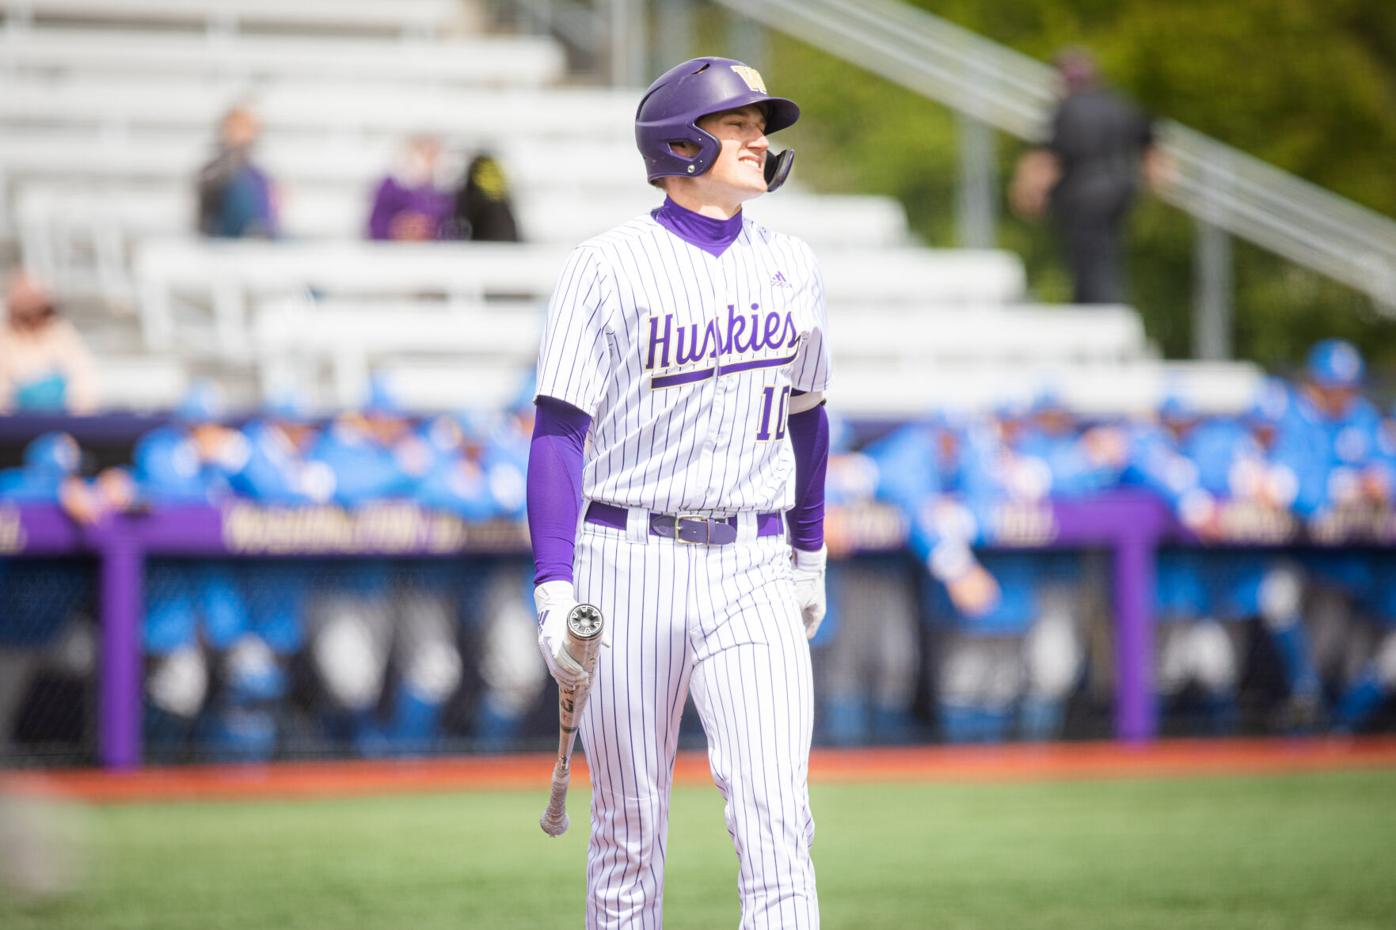 UW baseball season comes to an end in Pac-12 Tournament